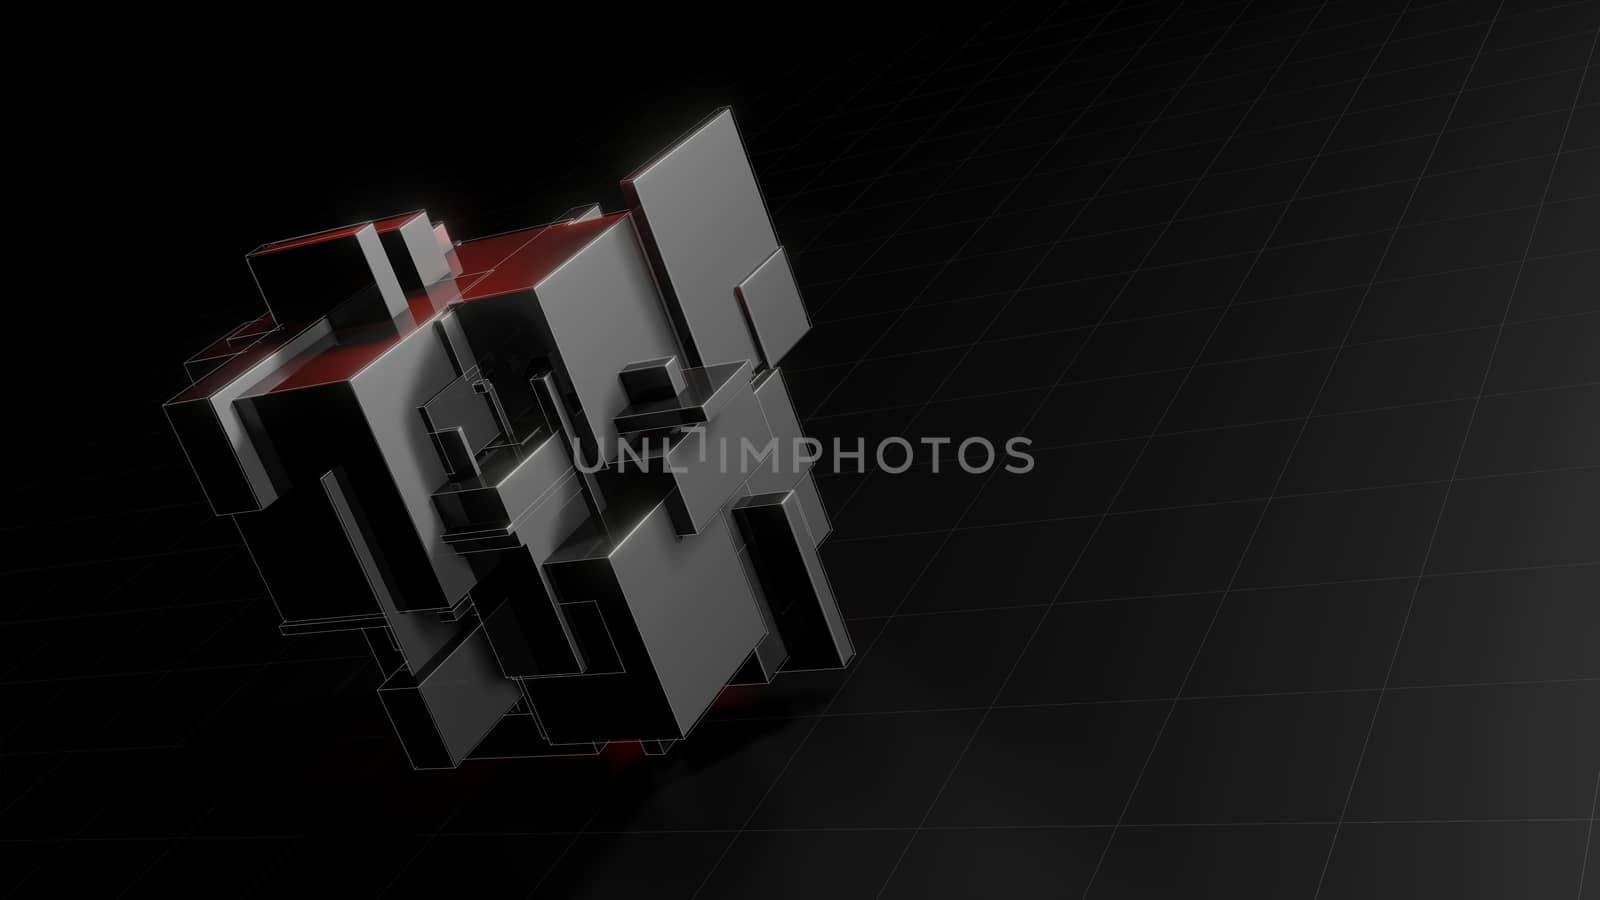 Abstract 3d object consisting of cubes. Red glow inside the object. Dark background and white grid on the floor. Technological 3d illustration for background